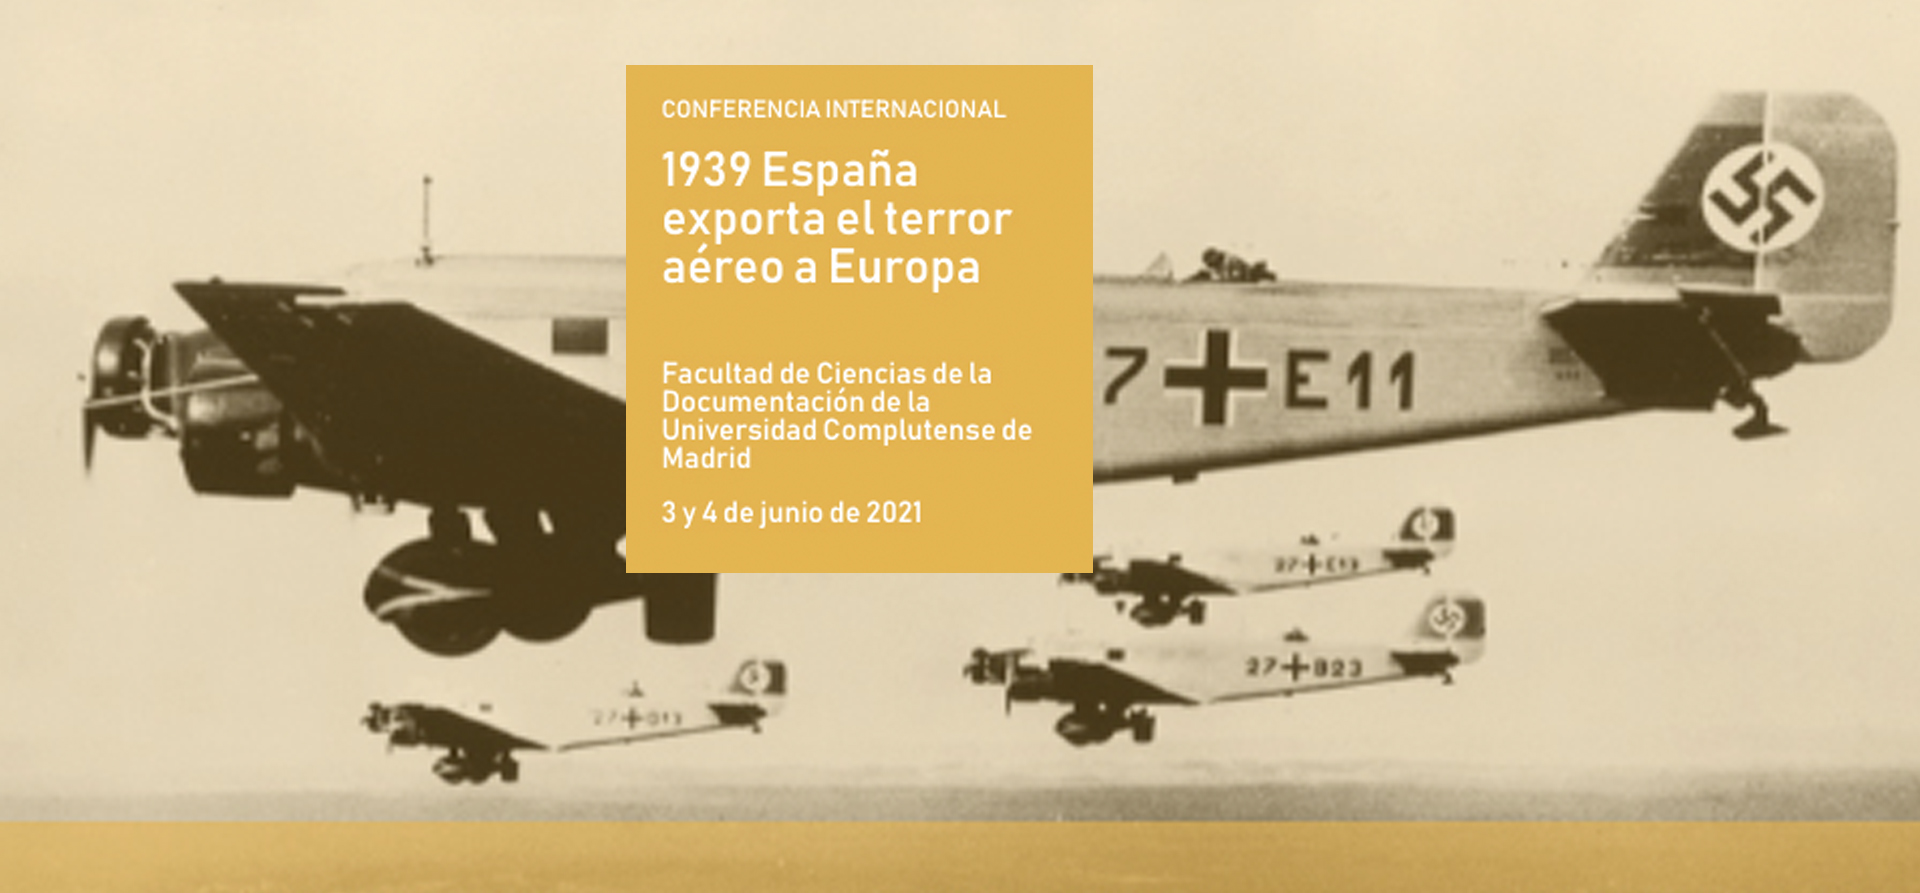 1939 SPAIN EXPORTS AERIAL TERROR TO EUROPE